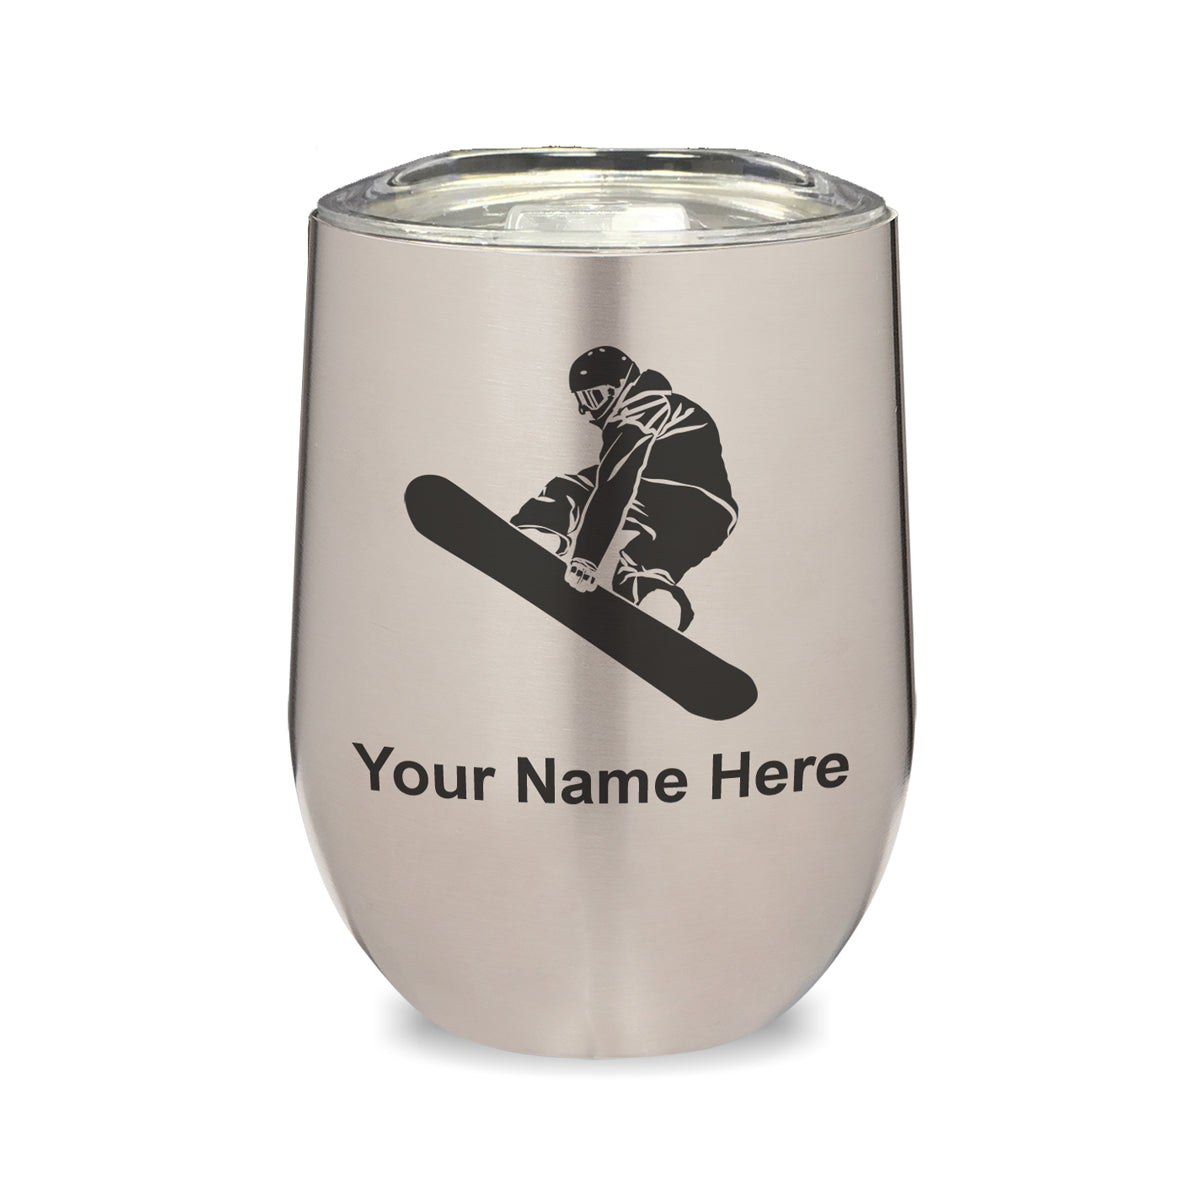 LaserGram Double Wall Stainless Steel Wine Glass, Snowboarder Woman, Personalized Engraving Included